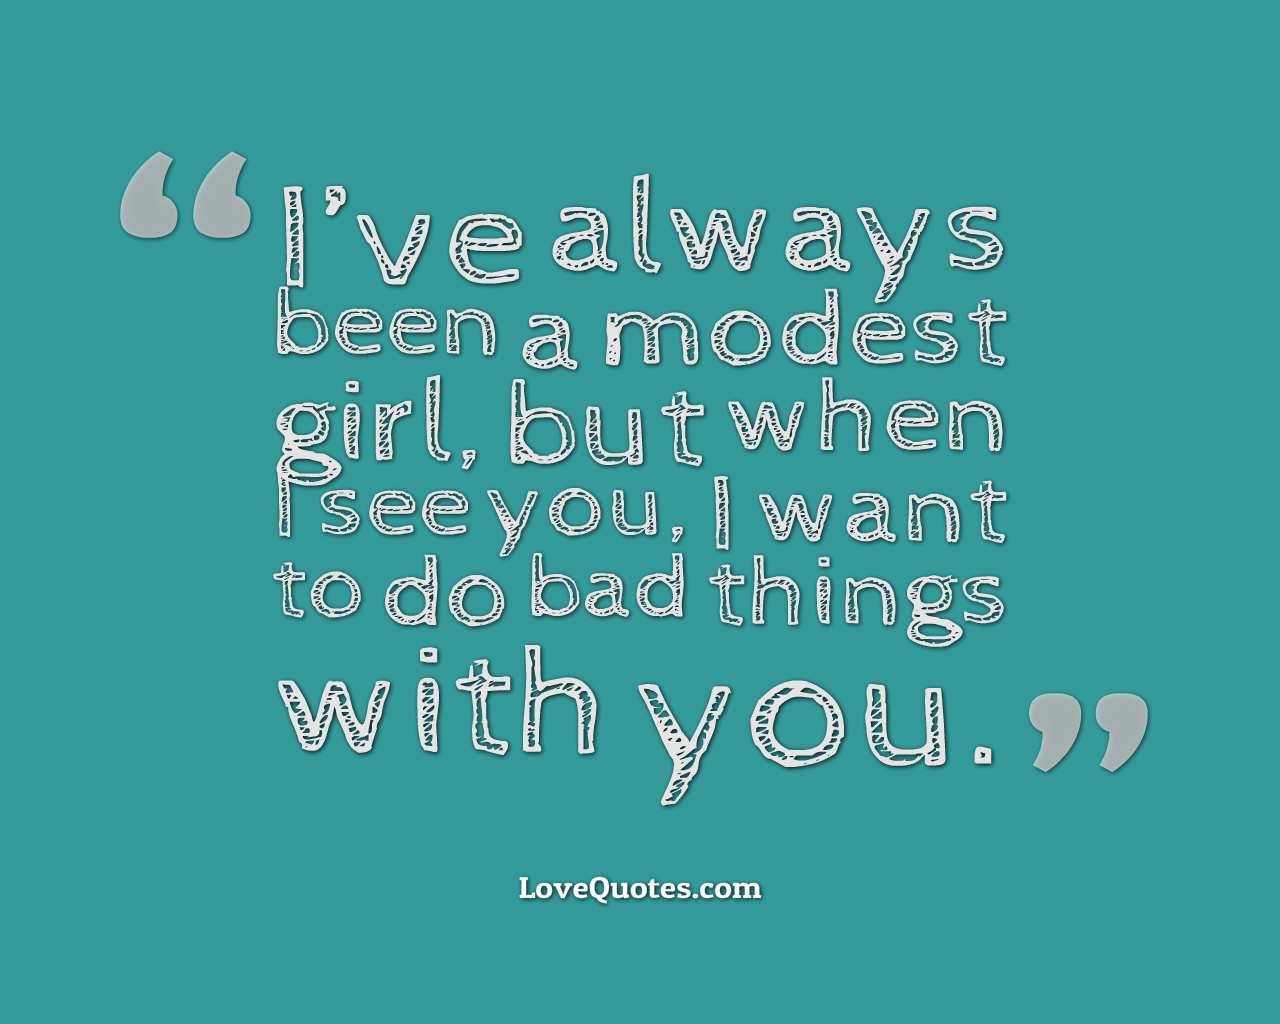 A Modest Girl - Love Quotes